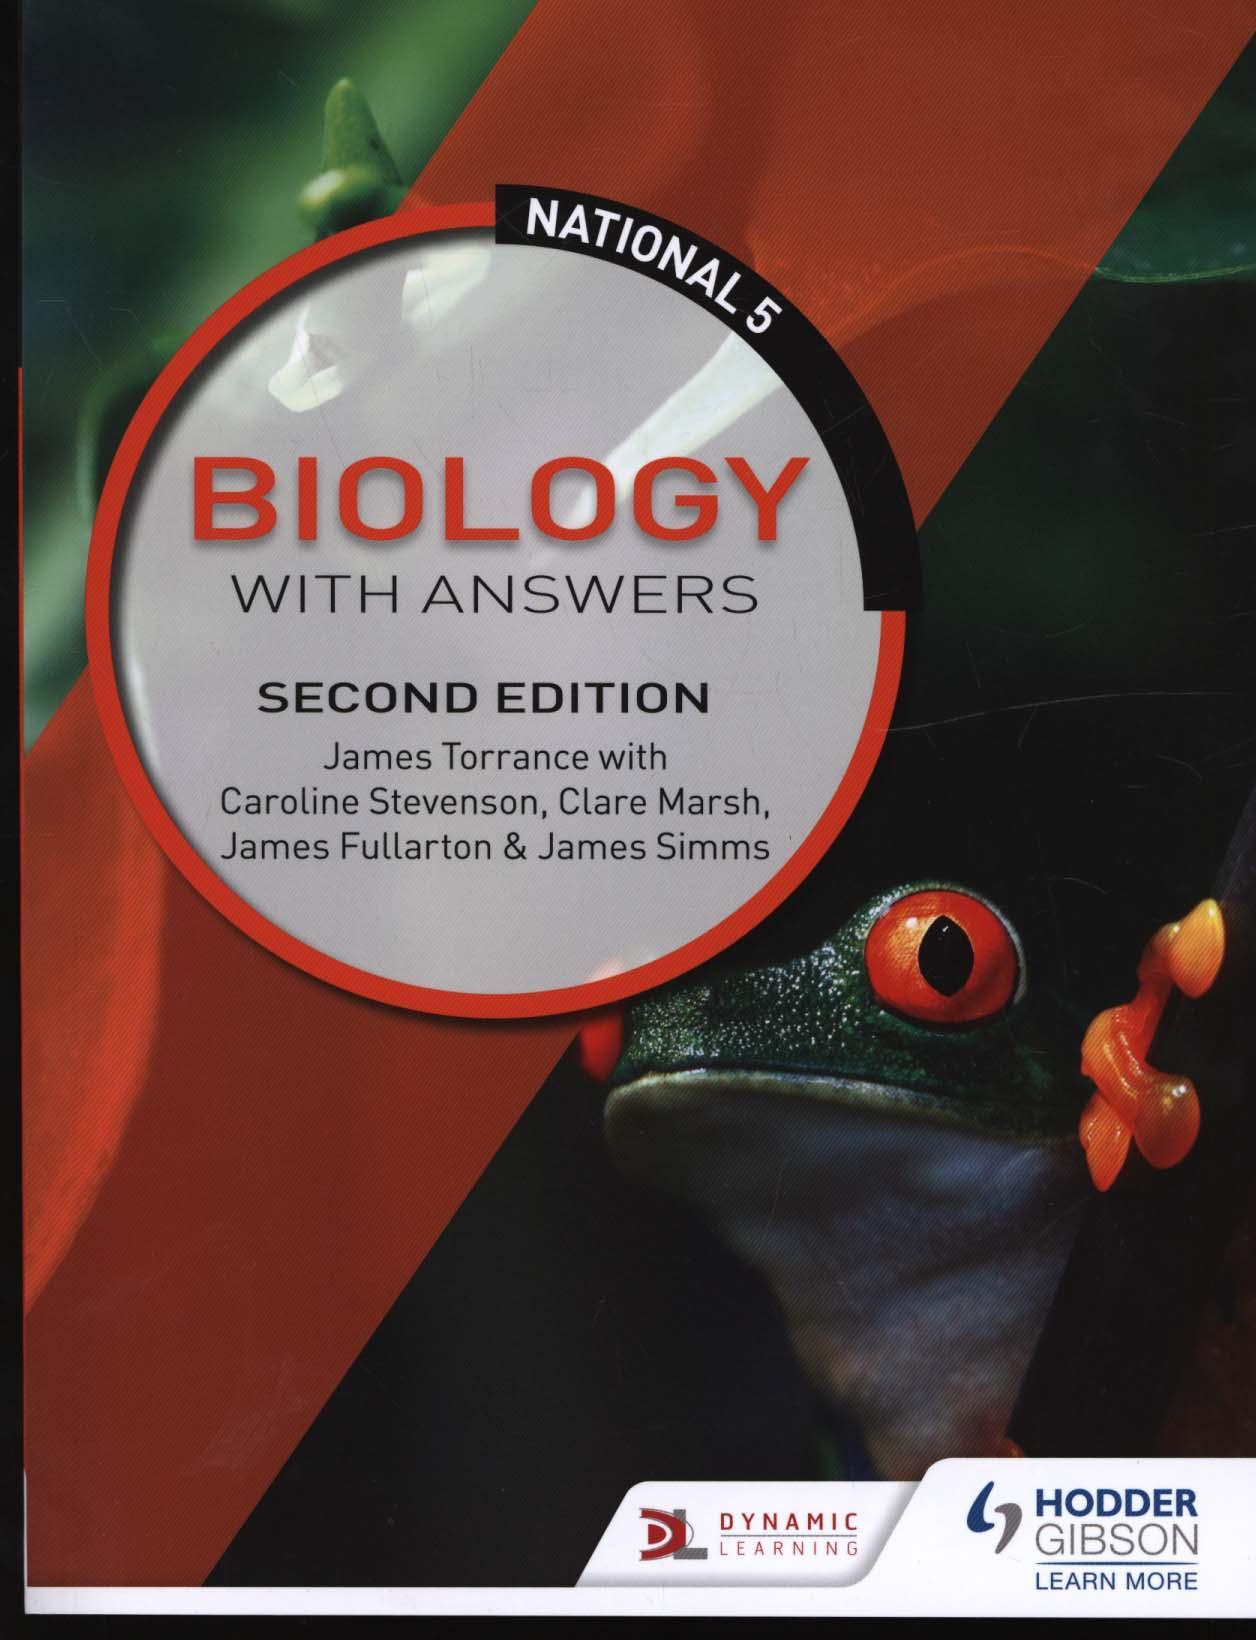 National 5 Biology with Answers: Second Edition